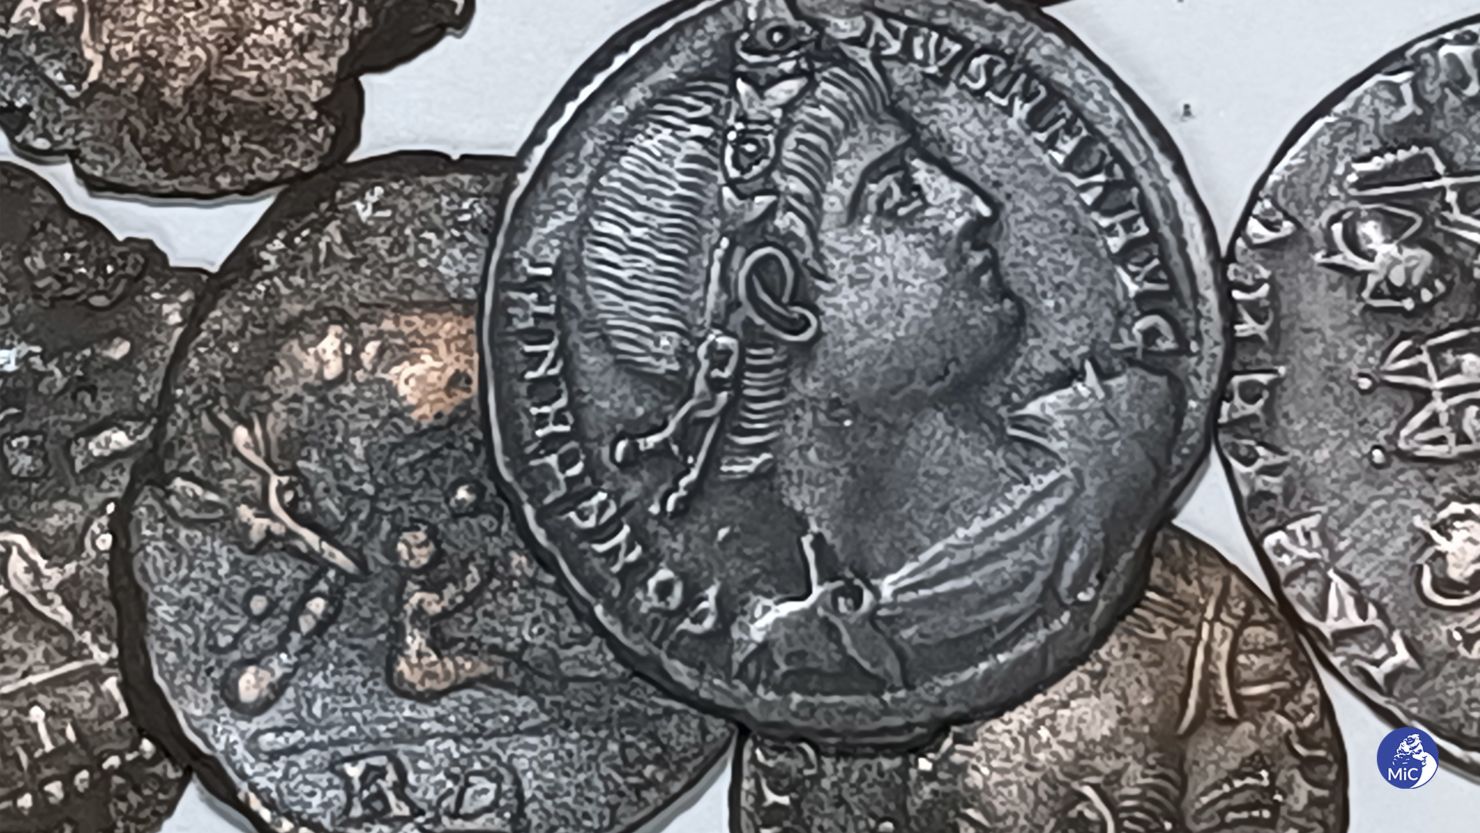 Coins dating back to the first half of the 4th century AD have been discovered in the sea of ​​the north-eastern coast of Sardinia, Italy.